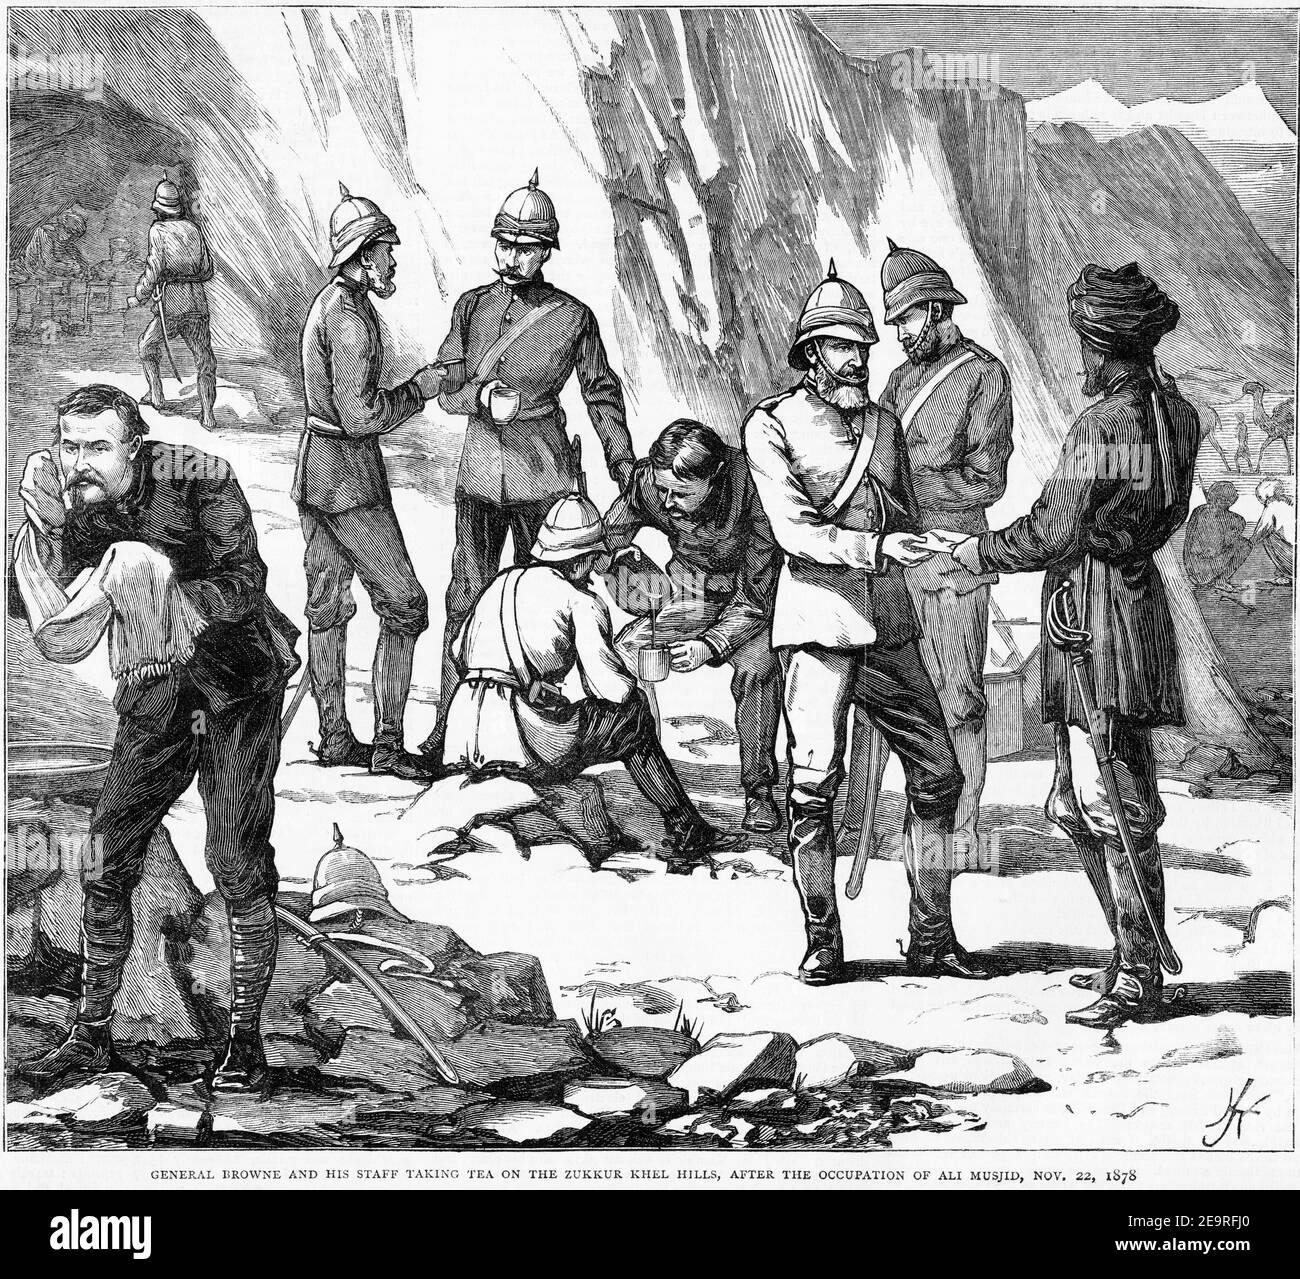 Engraving of Lieutenant General Sam Browne and his officers taking tea on the Zukker Khel Hills after the occupation of Ali Musjid, the opening battle in the Second Anglo-Afghan War, November 22, 1878. Stock Photo